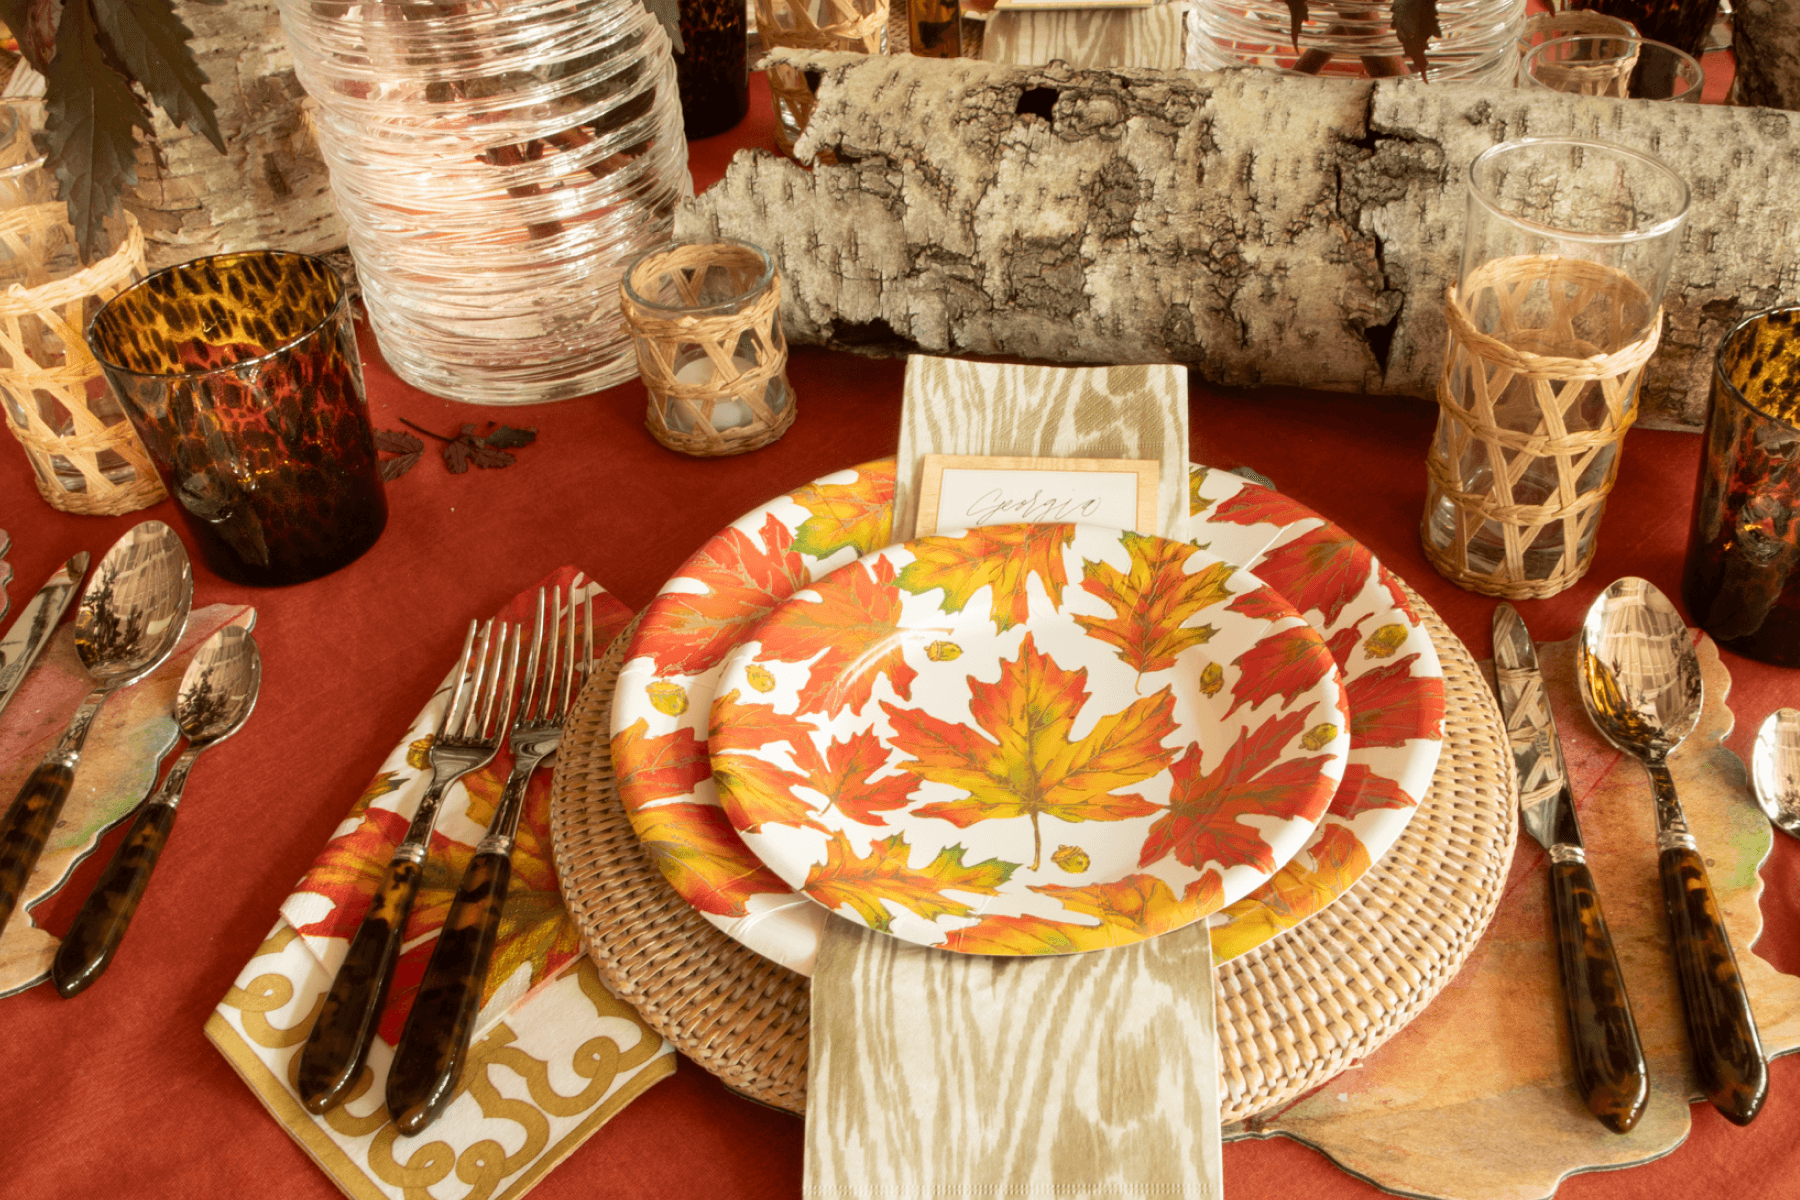 A table set with autumn leaf paper plates, tortoiseshell cutlery, and decorative birch logs.